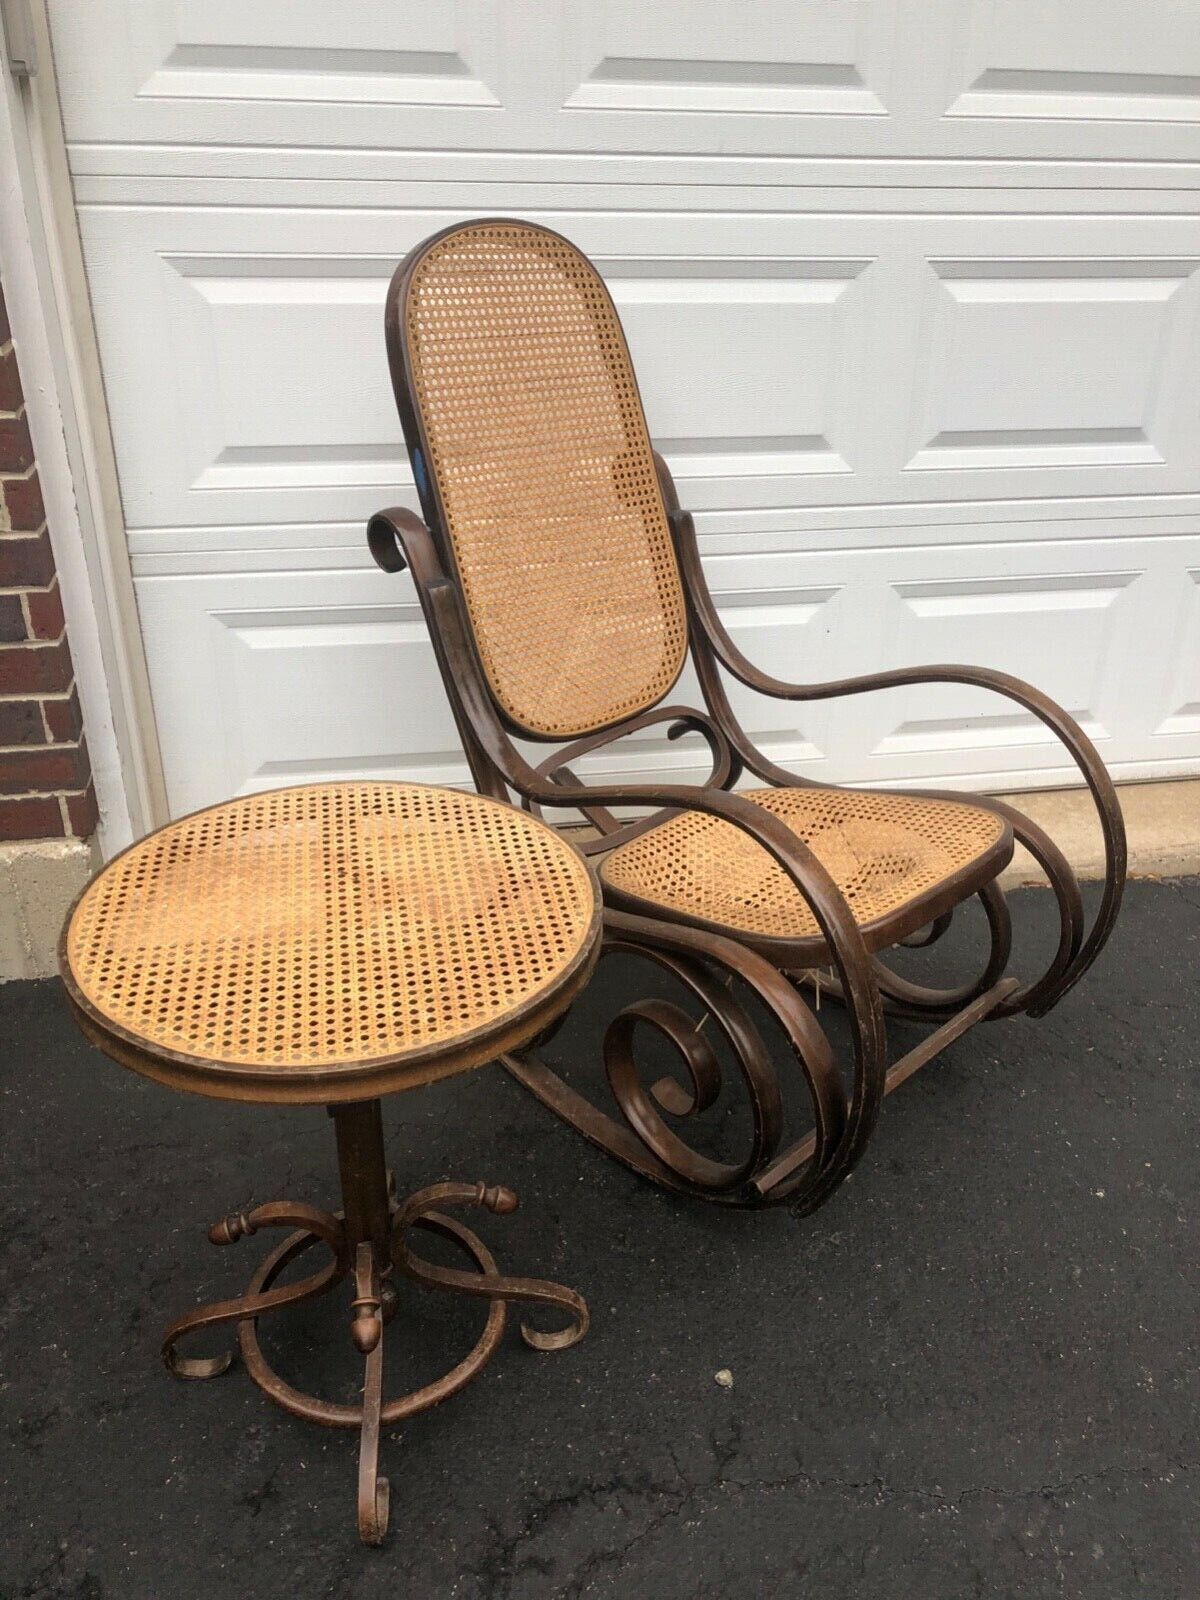 1970's Bentwood rocker and side table